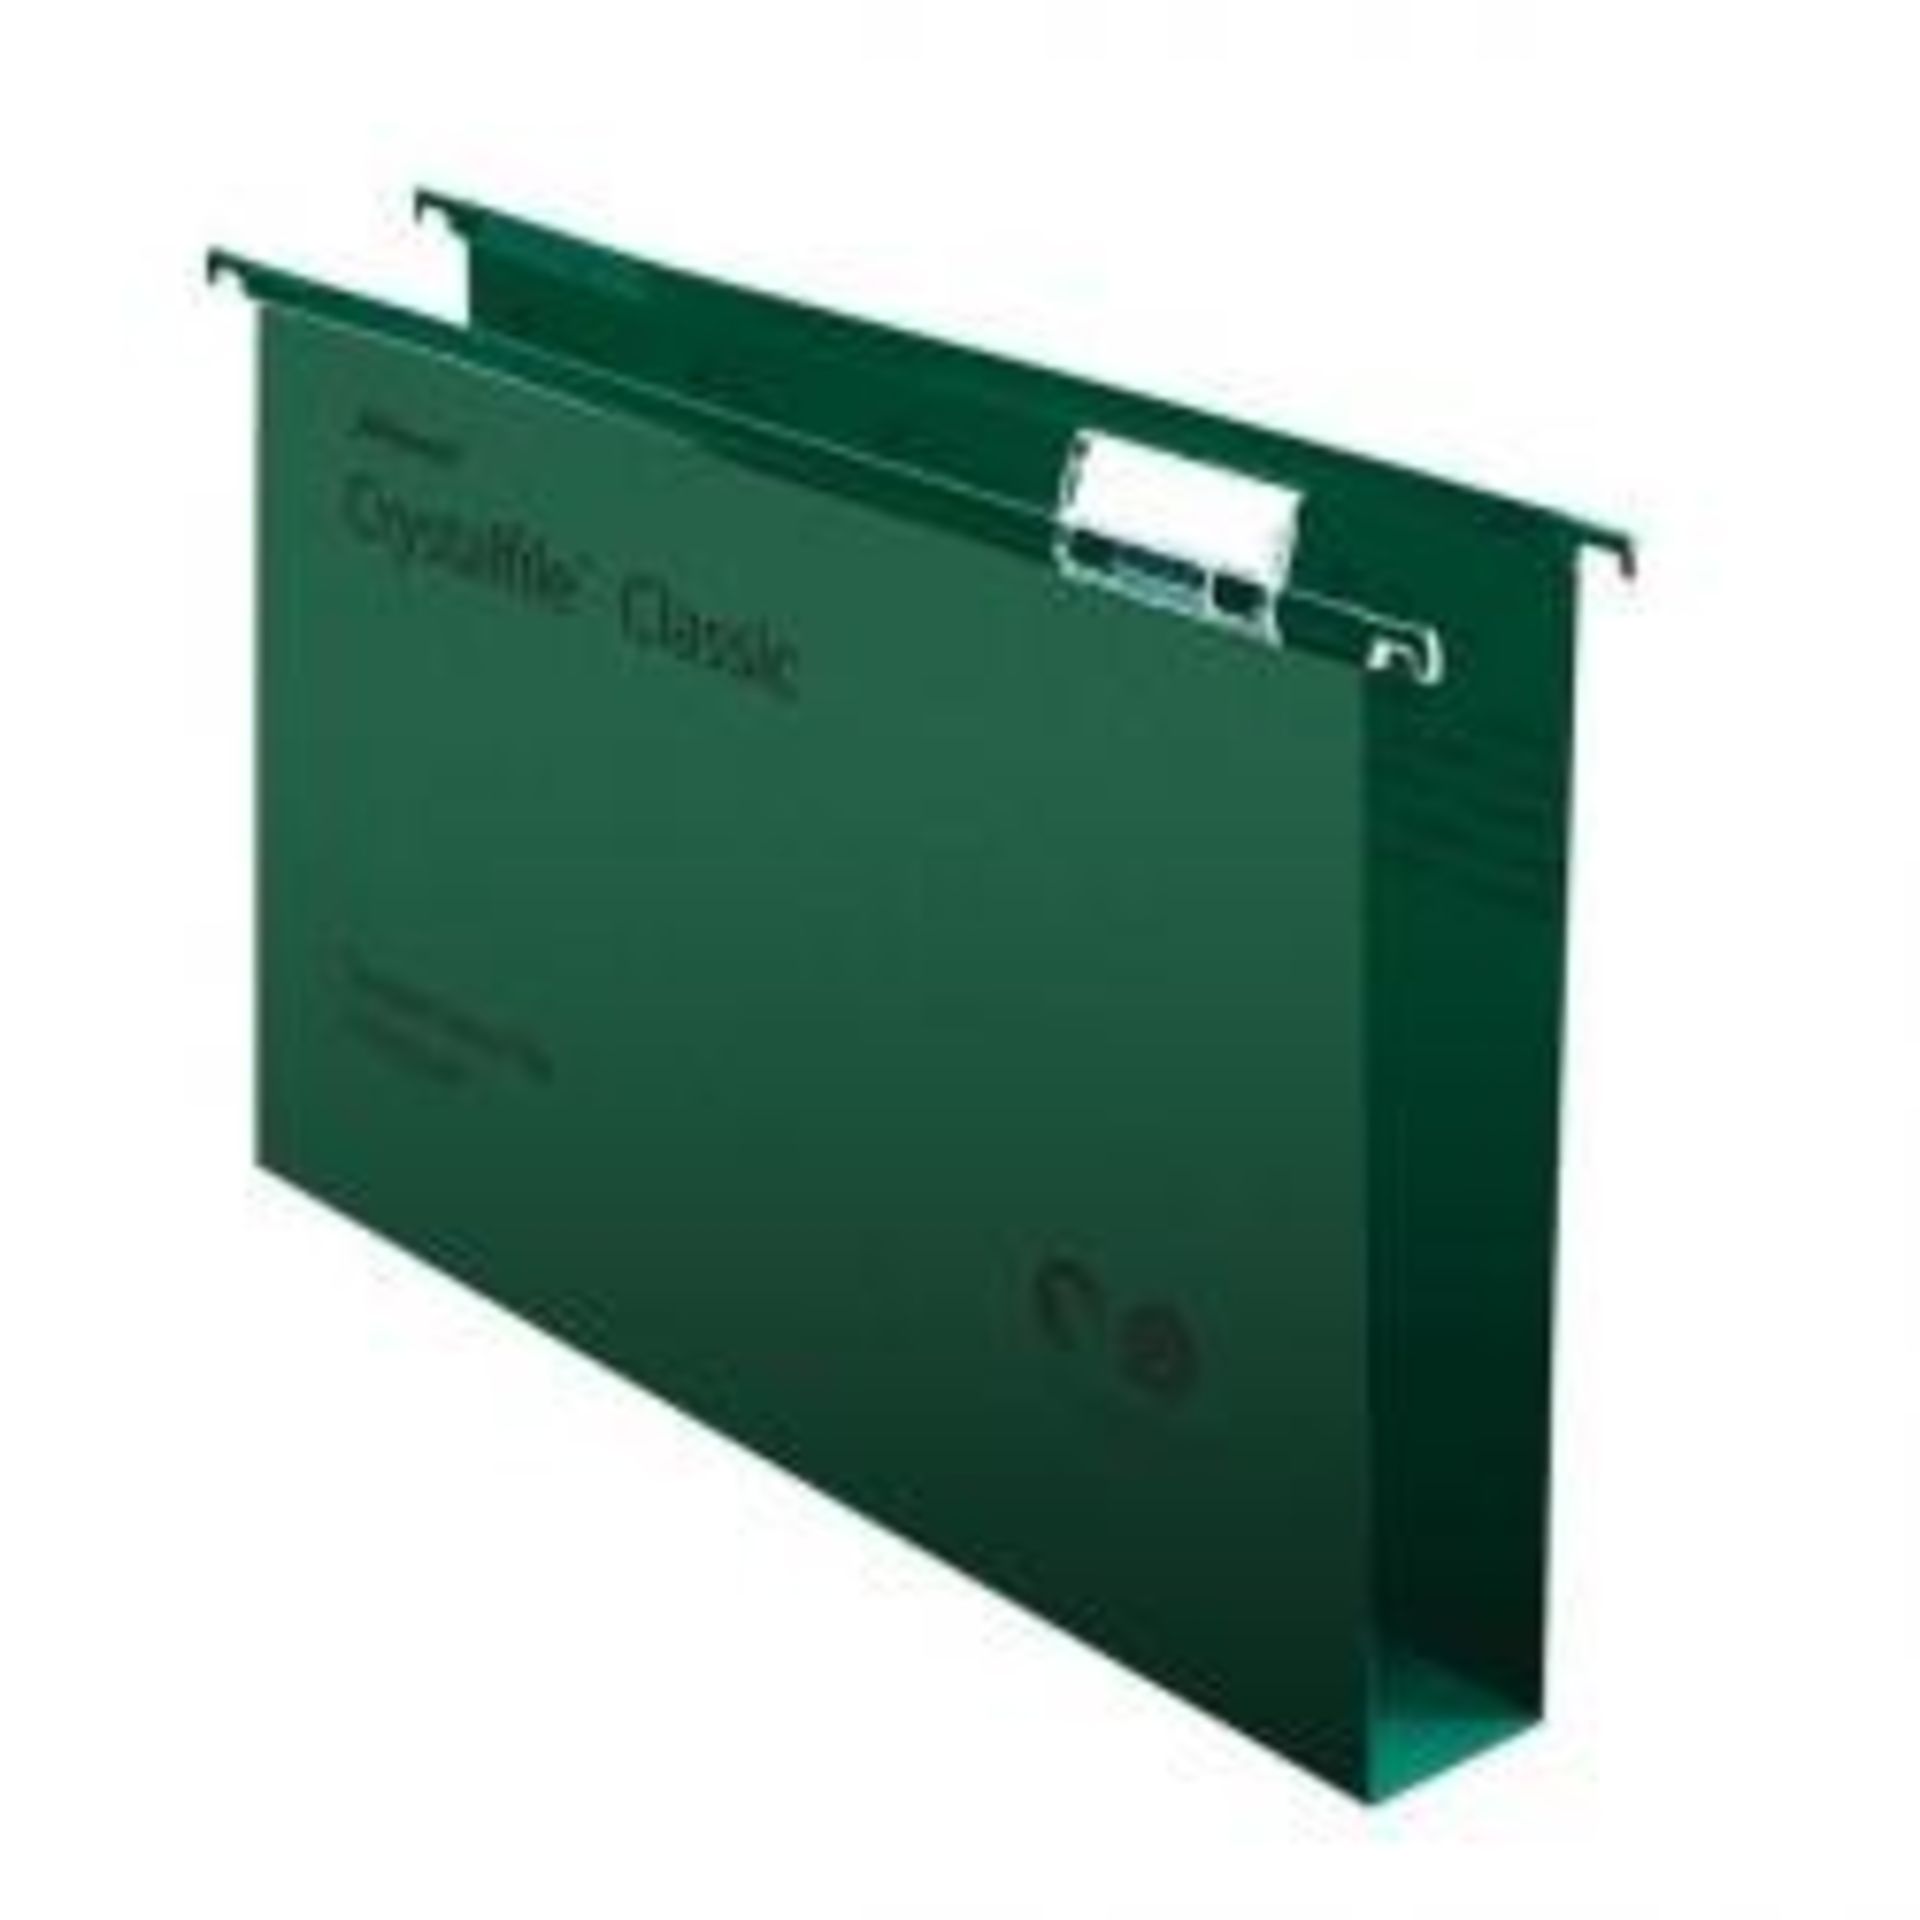 1 BOX OF 50 REXEL CRYSTALFILE CLASSIC IN GREEN / PN 172 / RRP £86.05 (VIEWING HIGHLY RECOMMENDED)